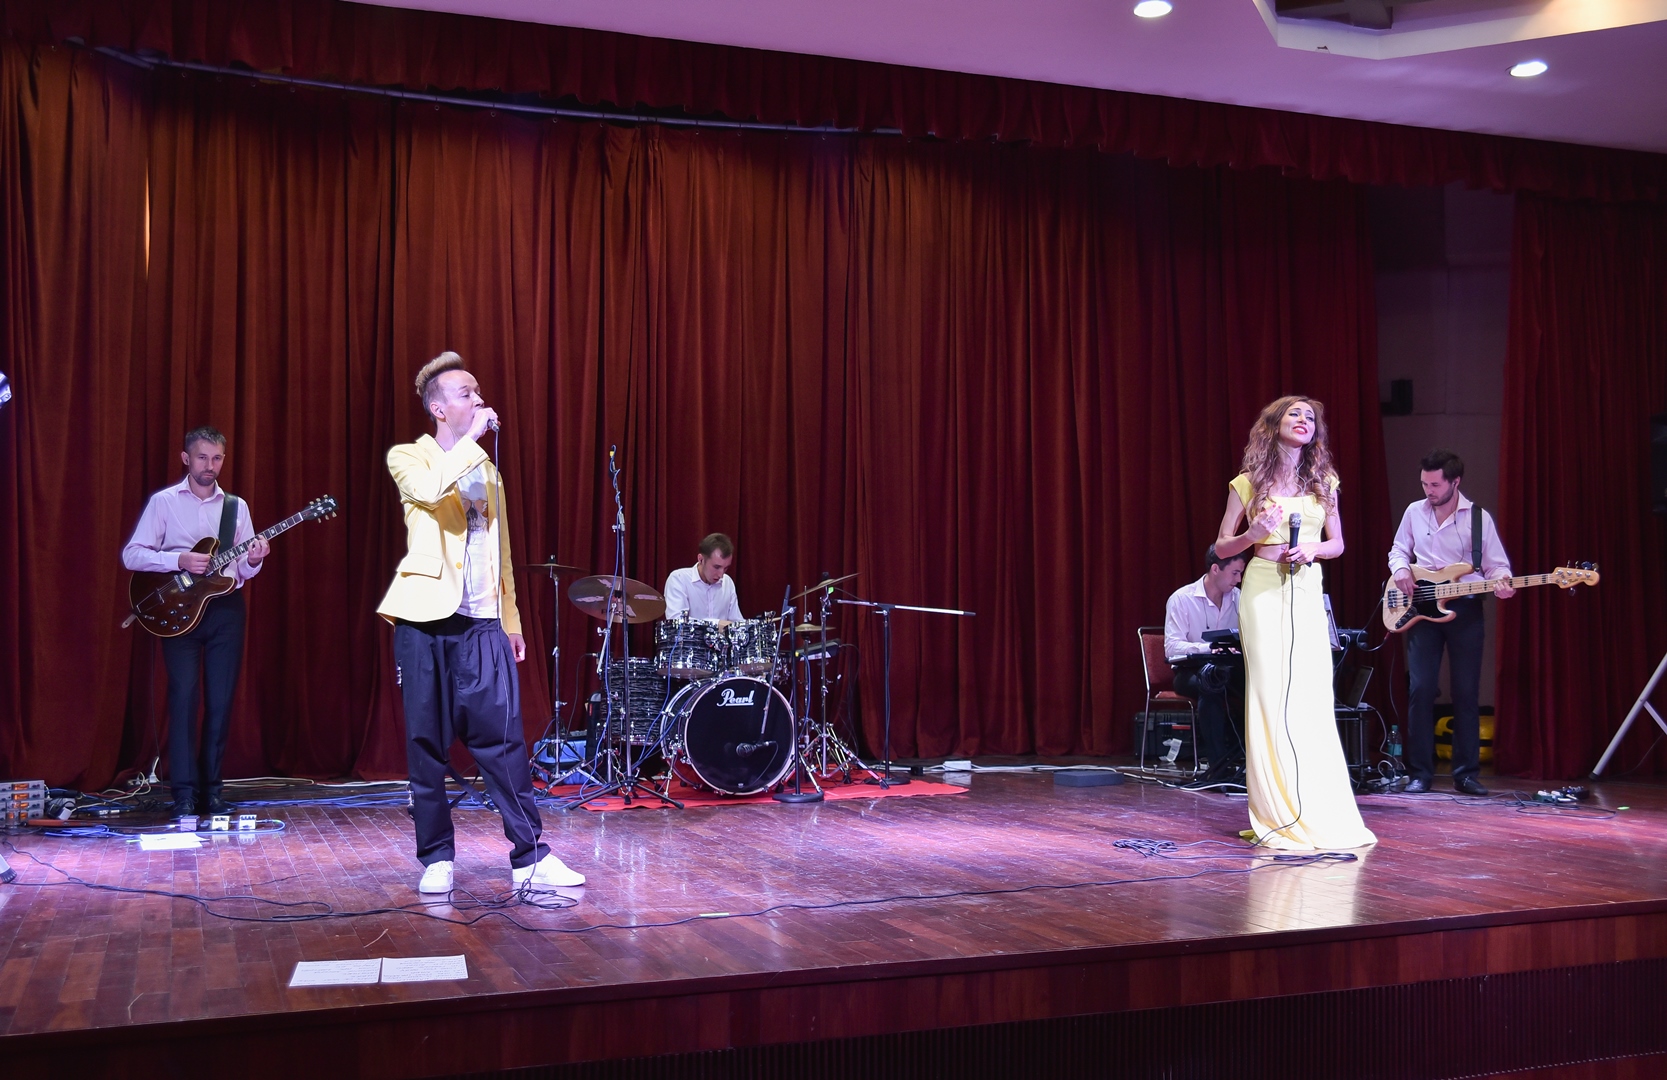 The Luxury Band from Moscow performed at the RCSC on June 8.